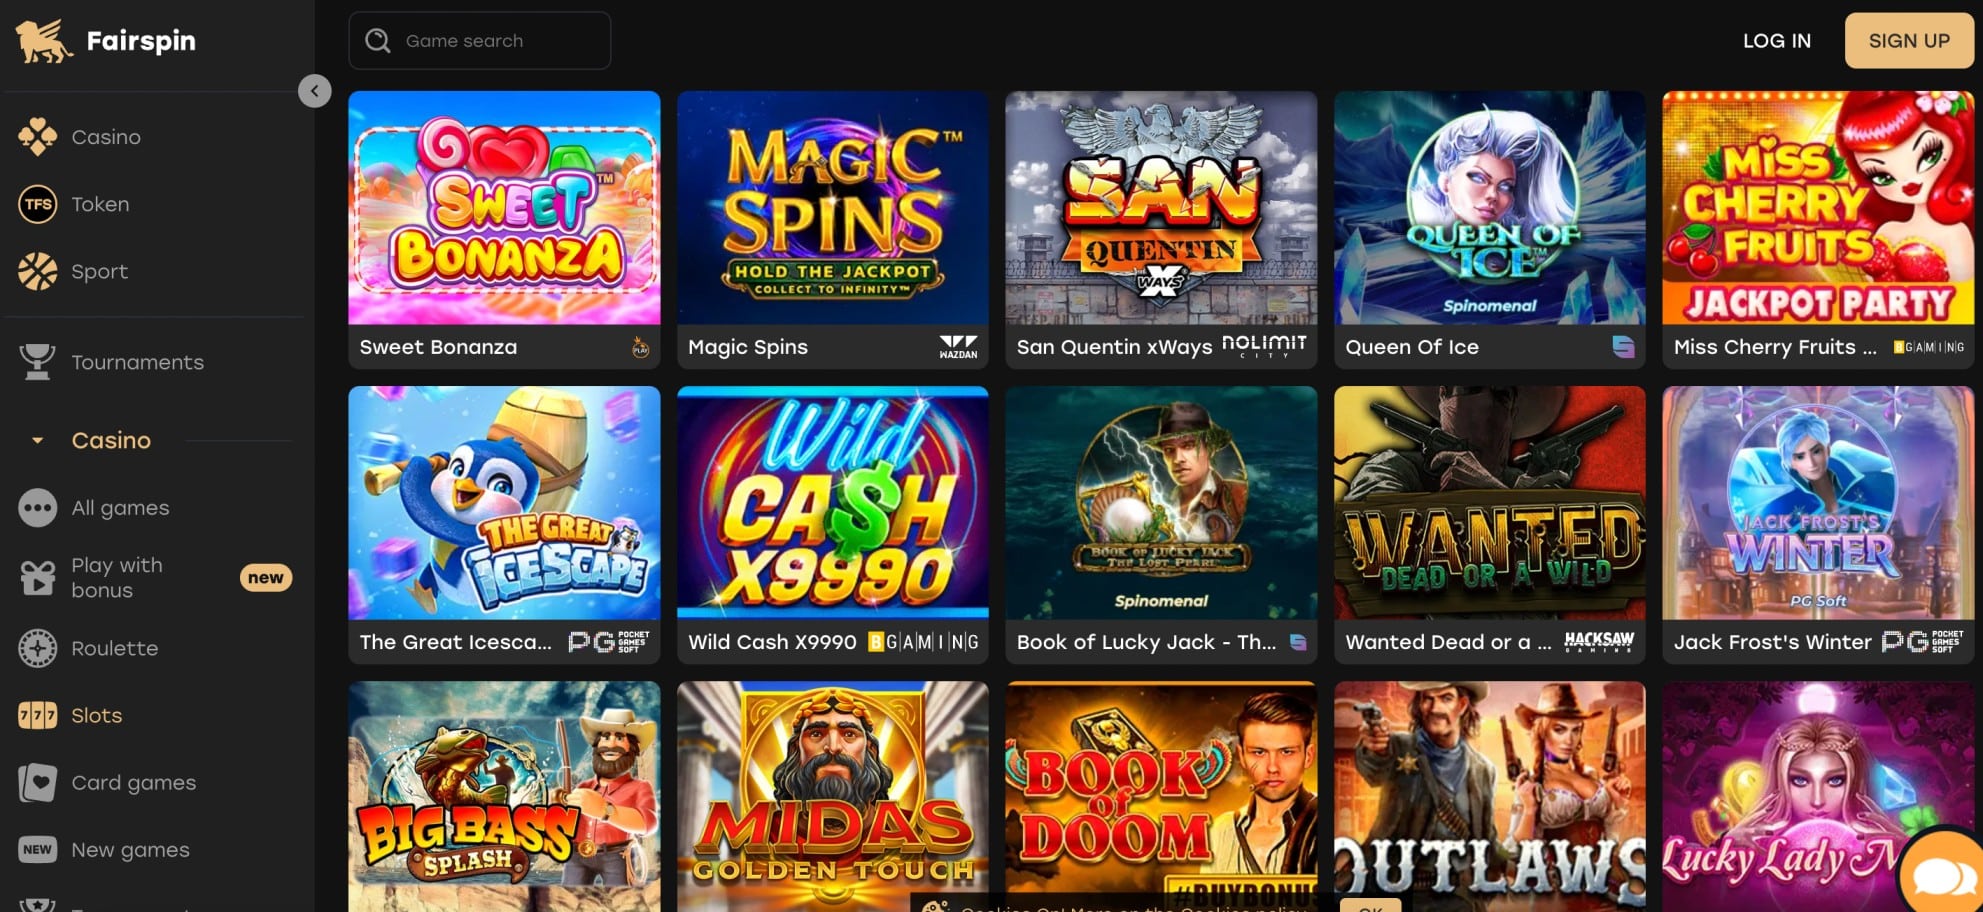 Fairspin casino review 